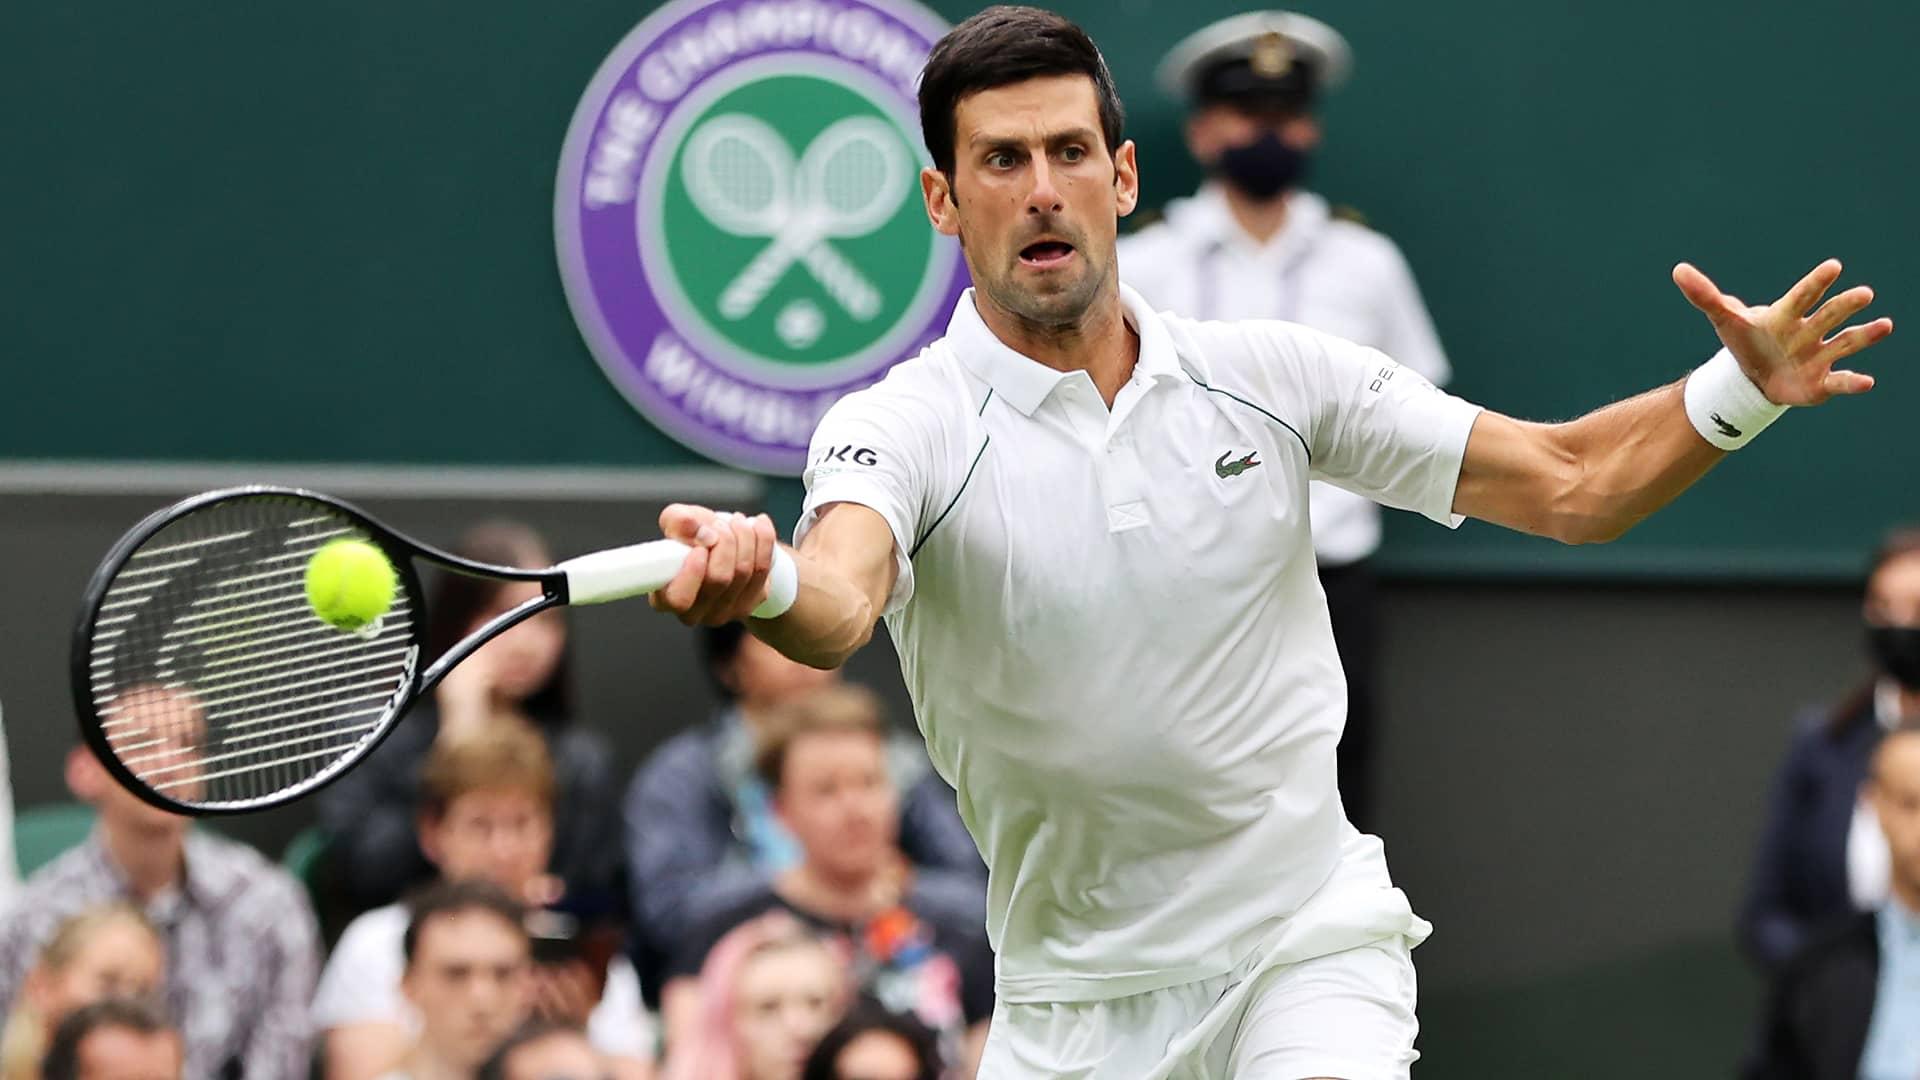 Wimbledon 2022 LIVE: Novak Djokovic eyeing his fourth straight Wimbledon title, Can the top seed win his maiden Grand Slam this year? Check Out